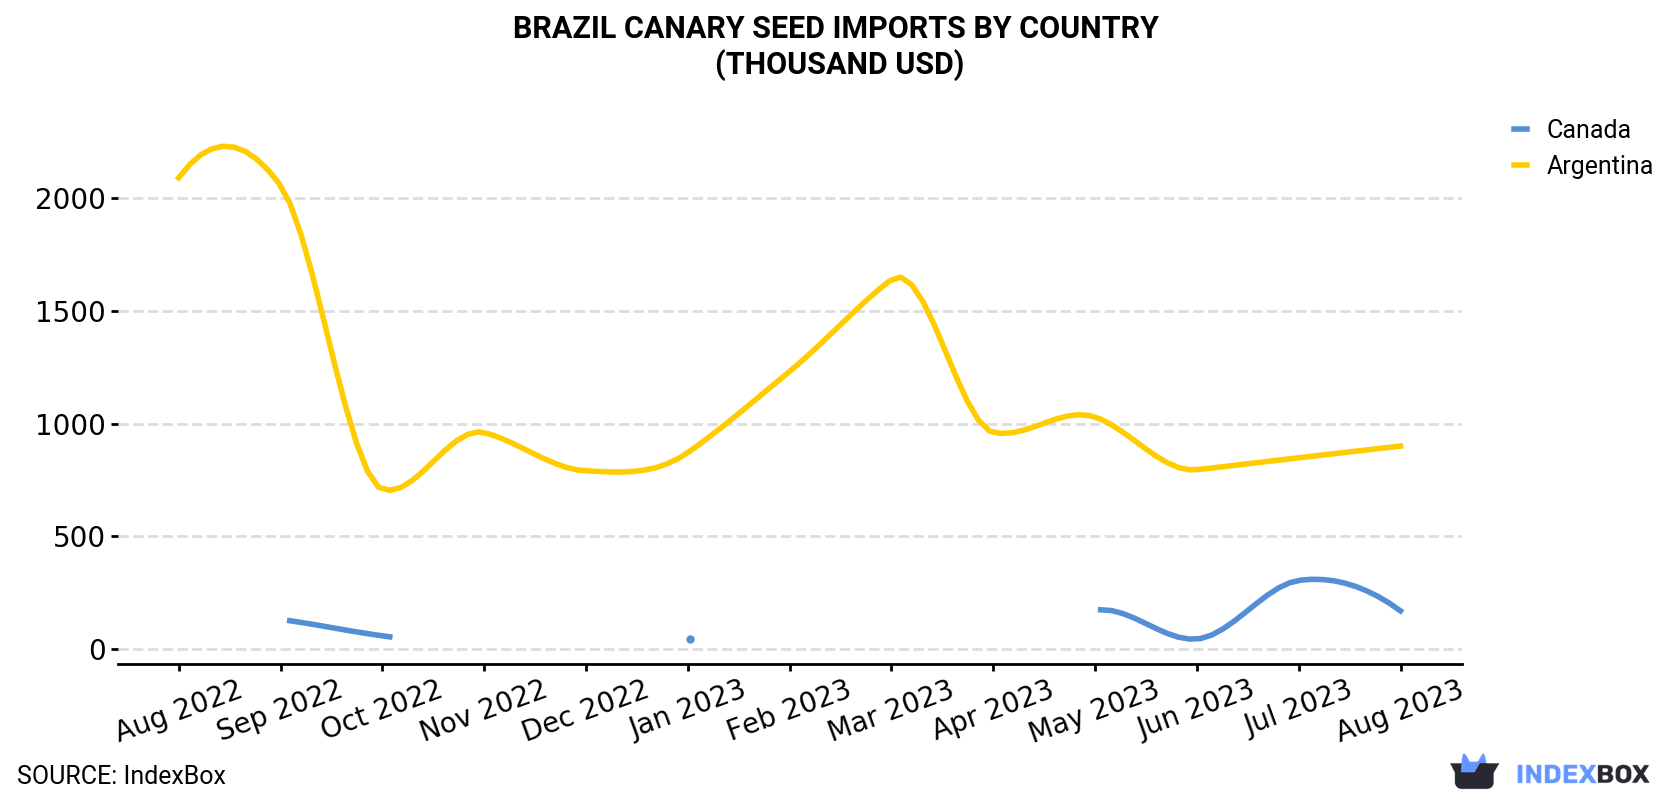 Brazil Canary Seed Imports By Country (Thousand USD)